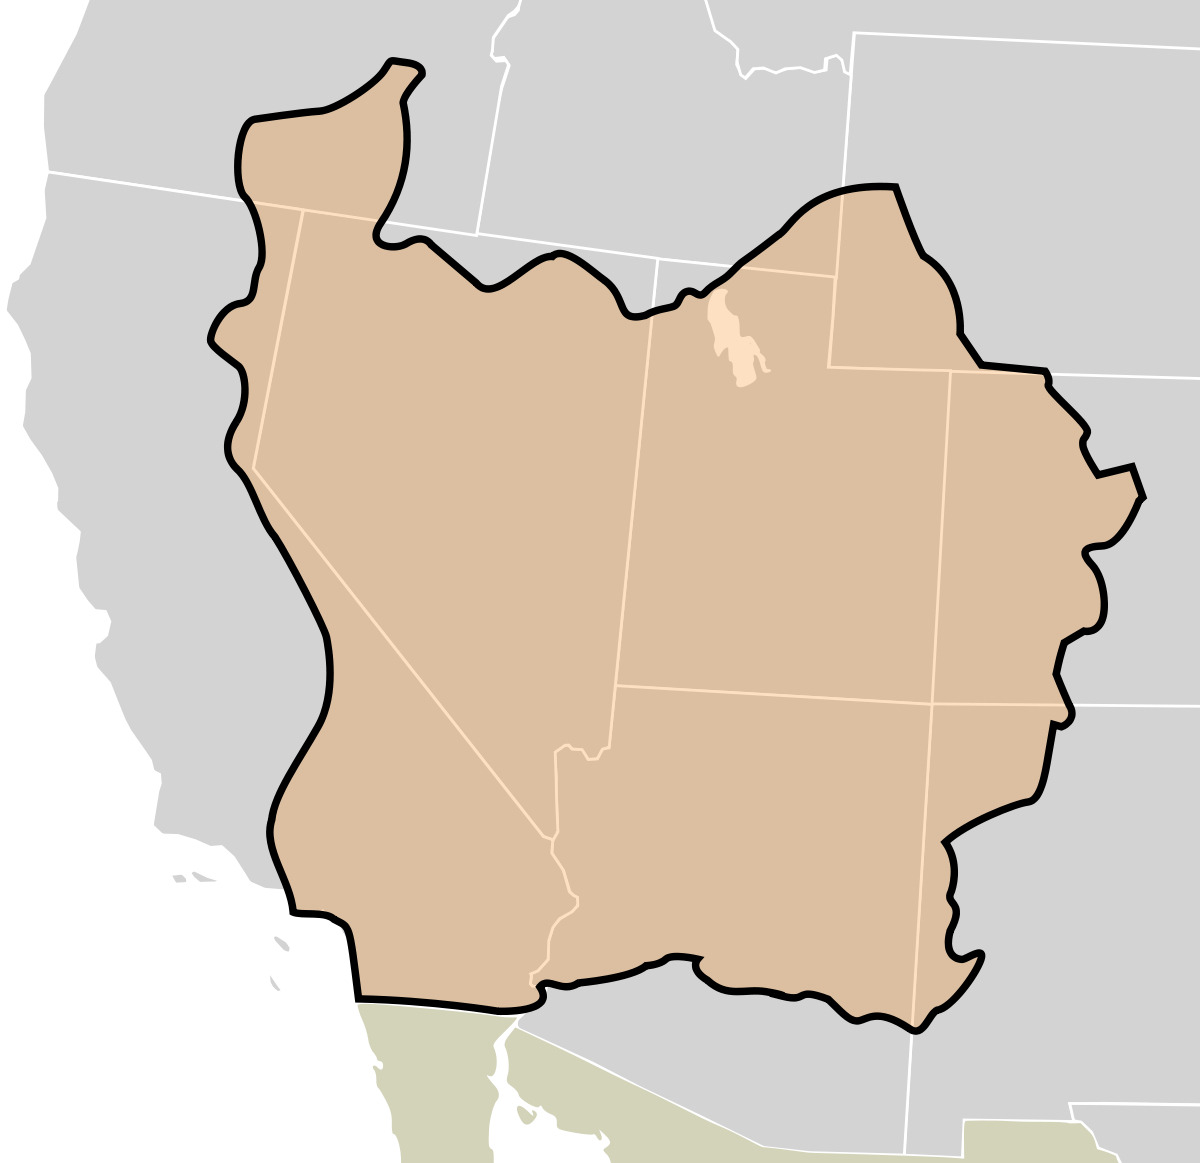 Proposed State Of Deseret The State Of Deseret Maps On The Web